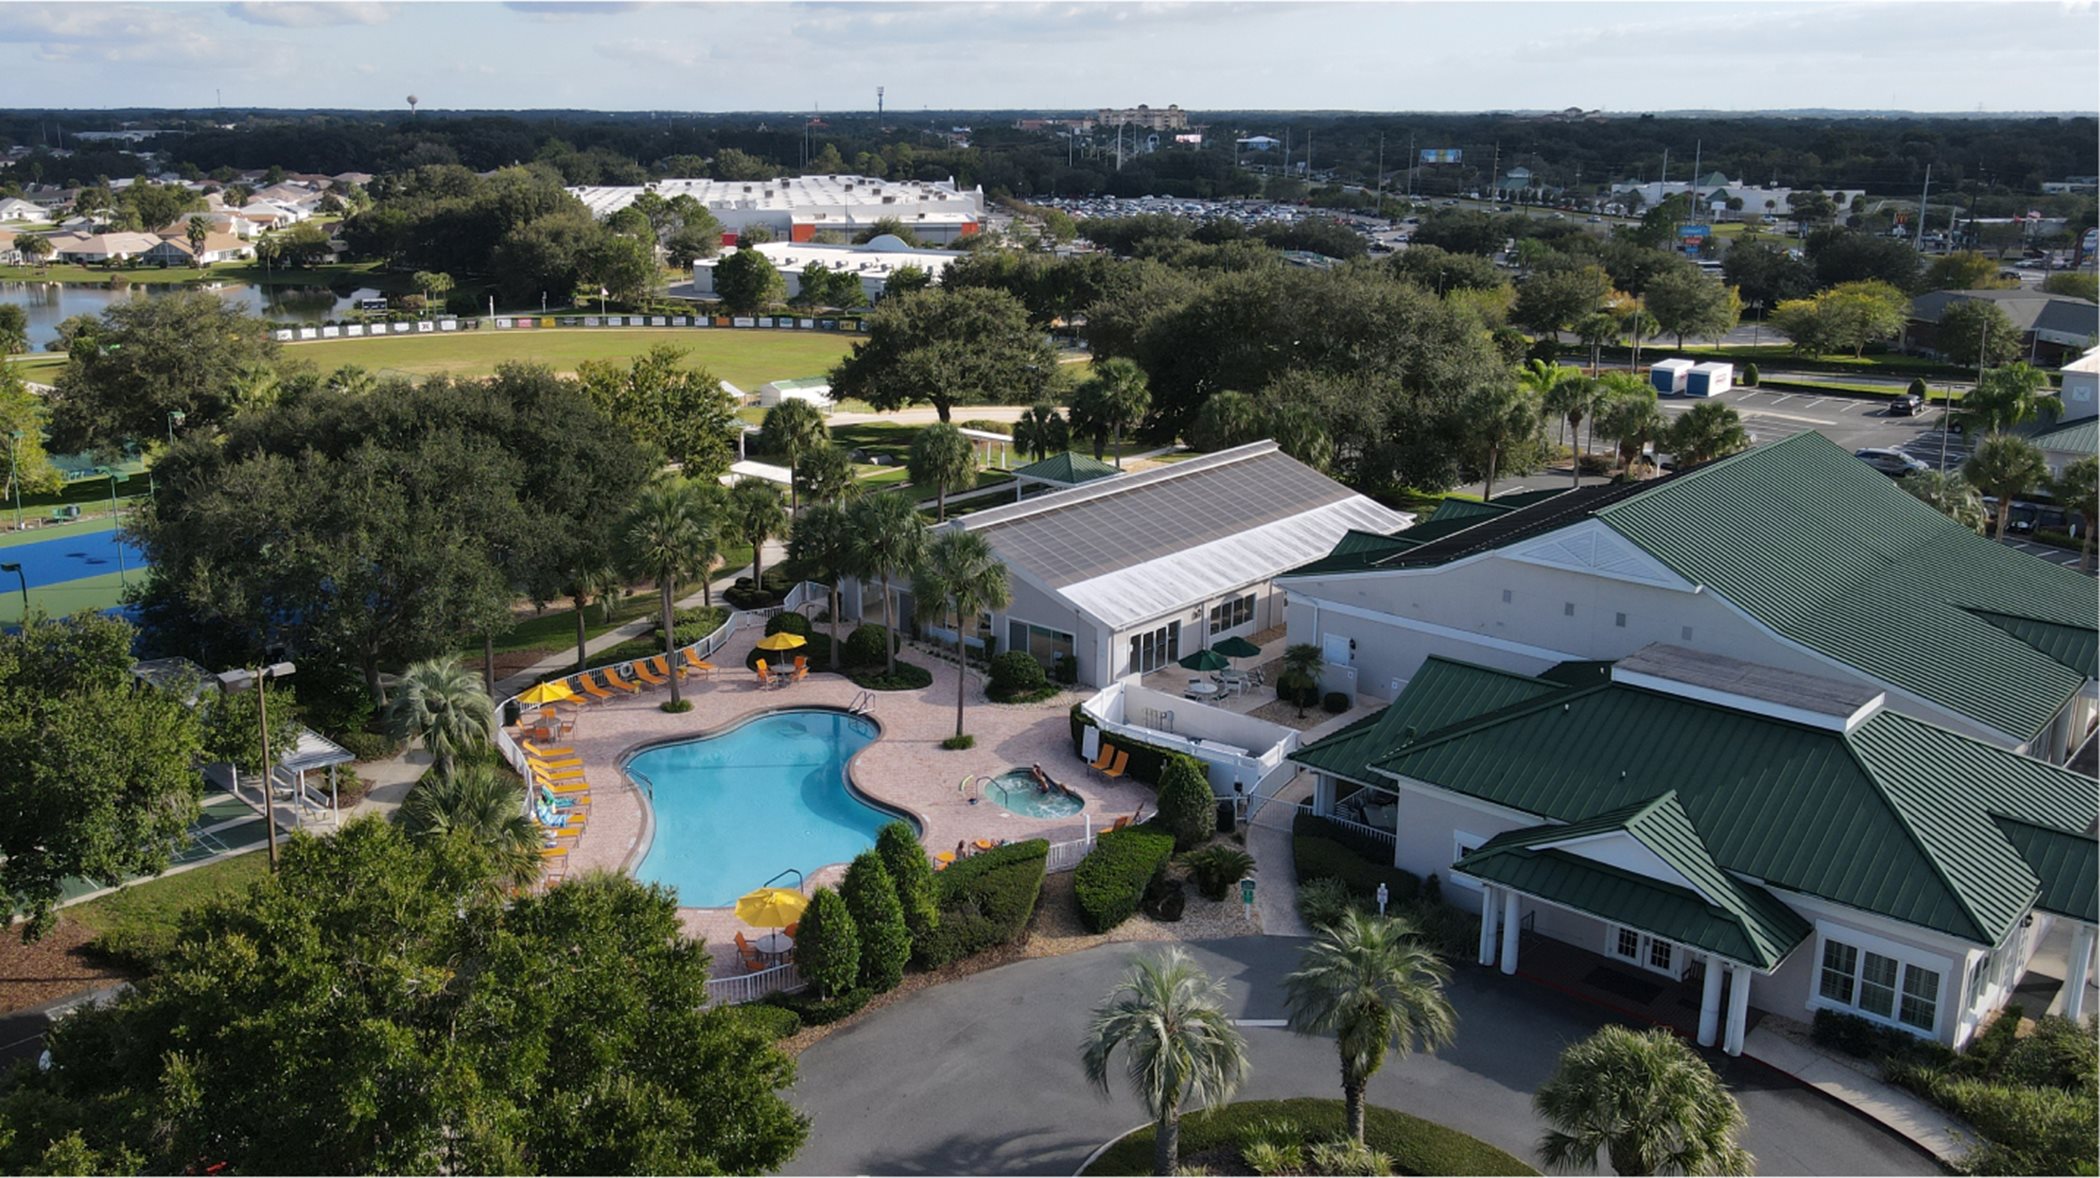 Drone shot of clubhouse pool and hot tub